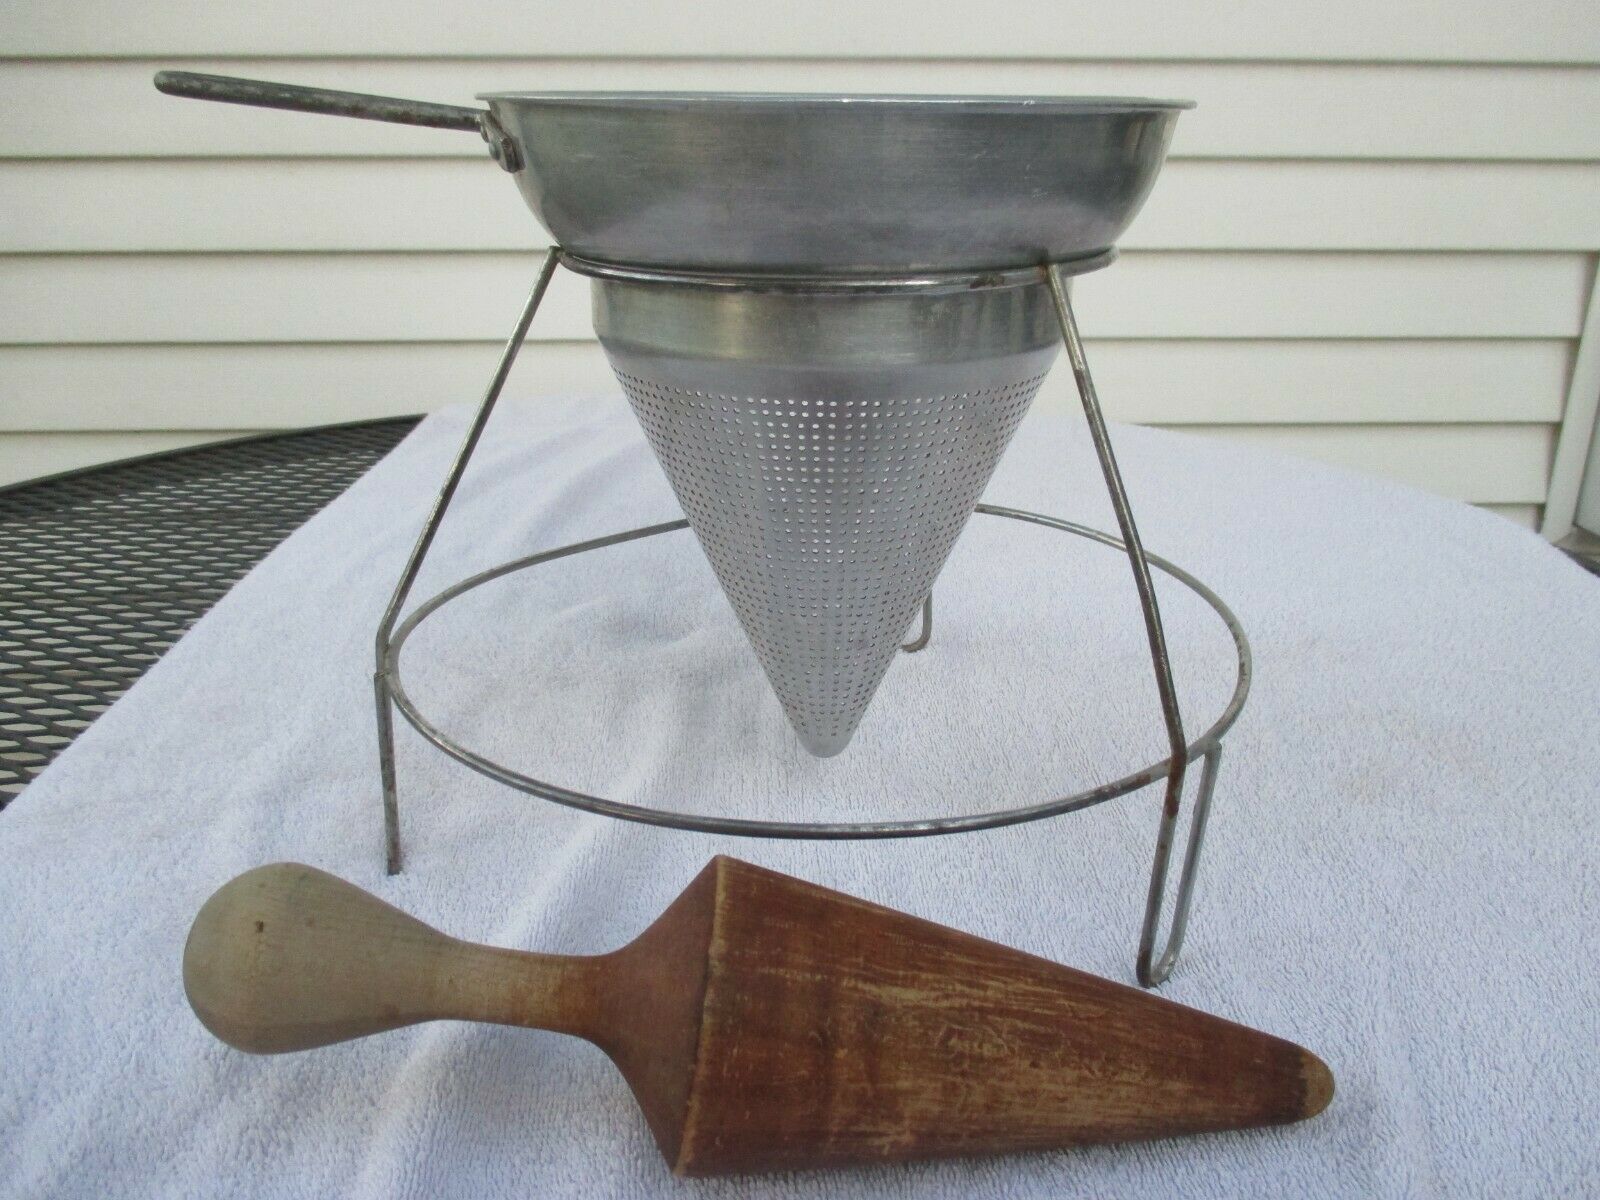 Vintage Aluminum Juice Colander Complete With Stand And Wooden Pestle